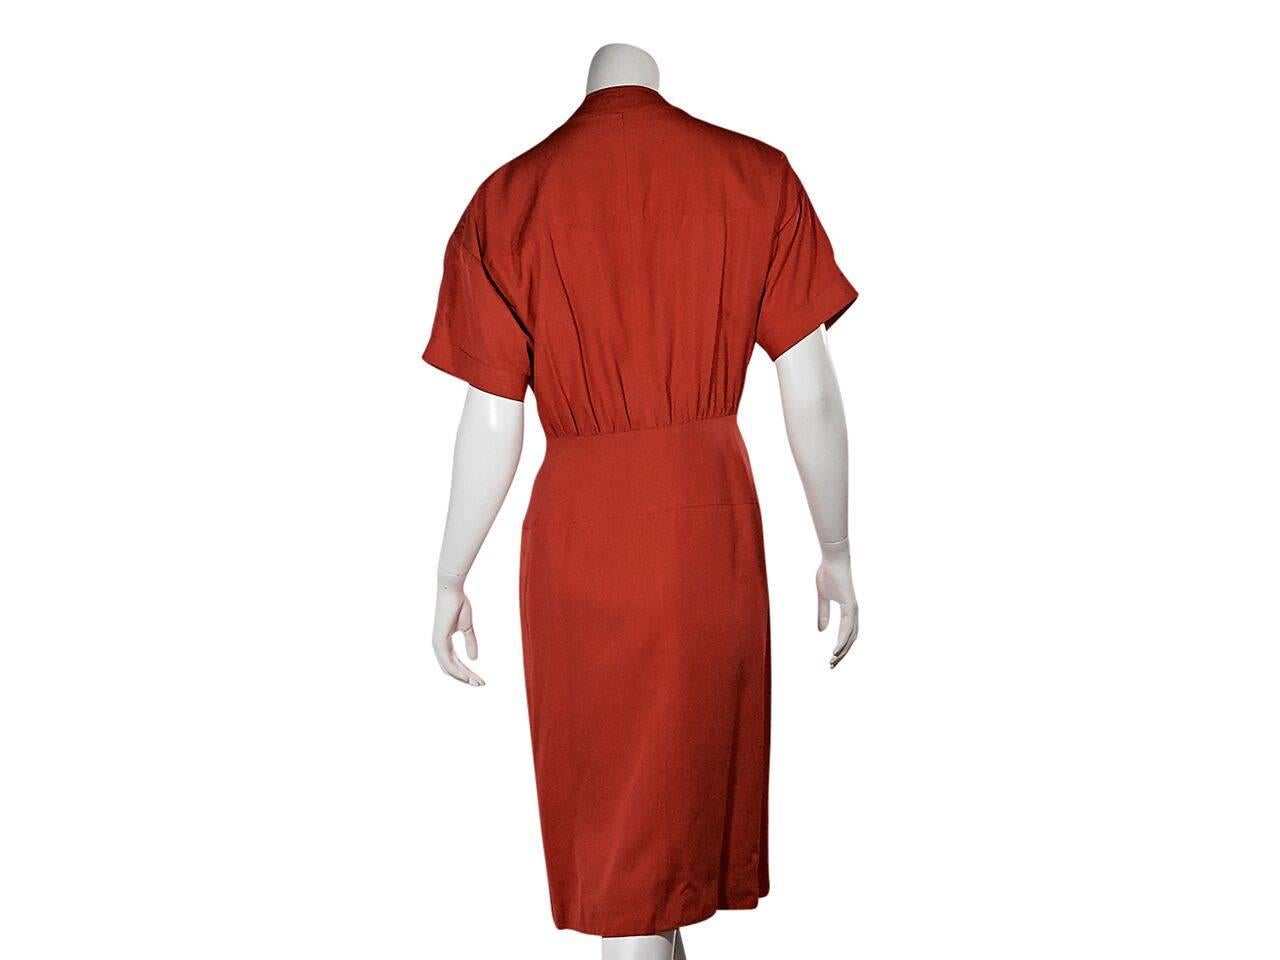 Women's Red Vintage Chanel Double-Breasted Dress